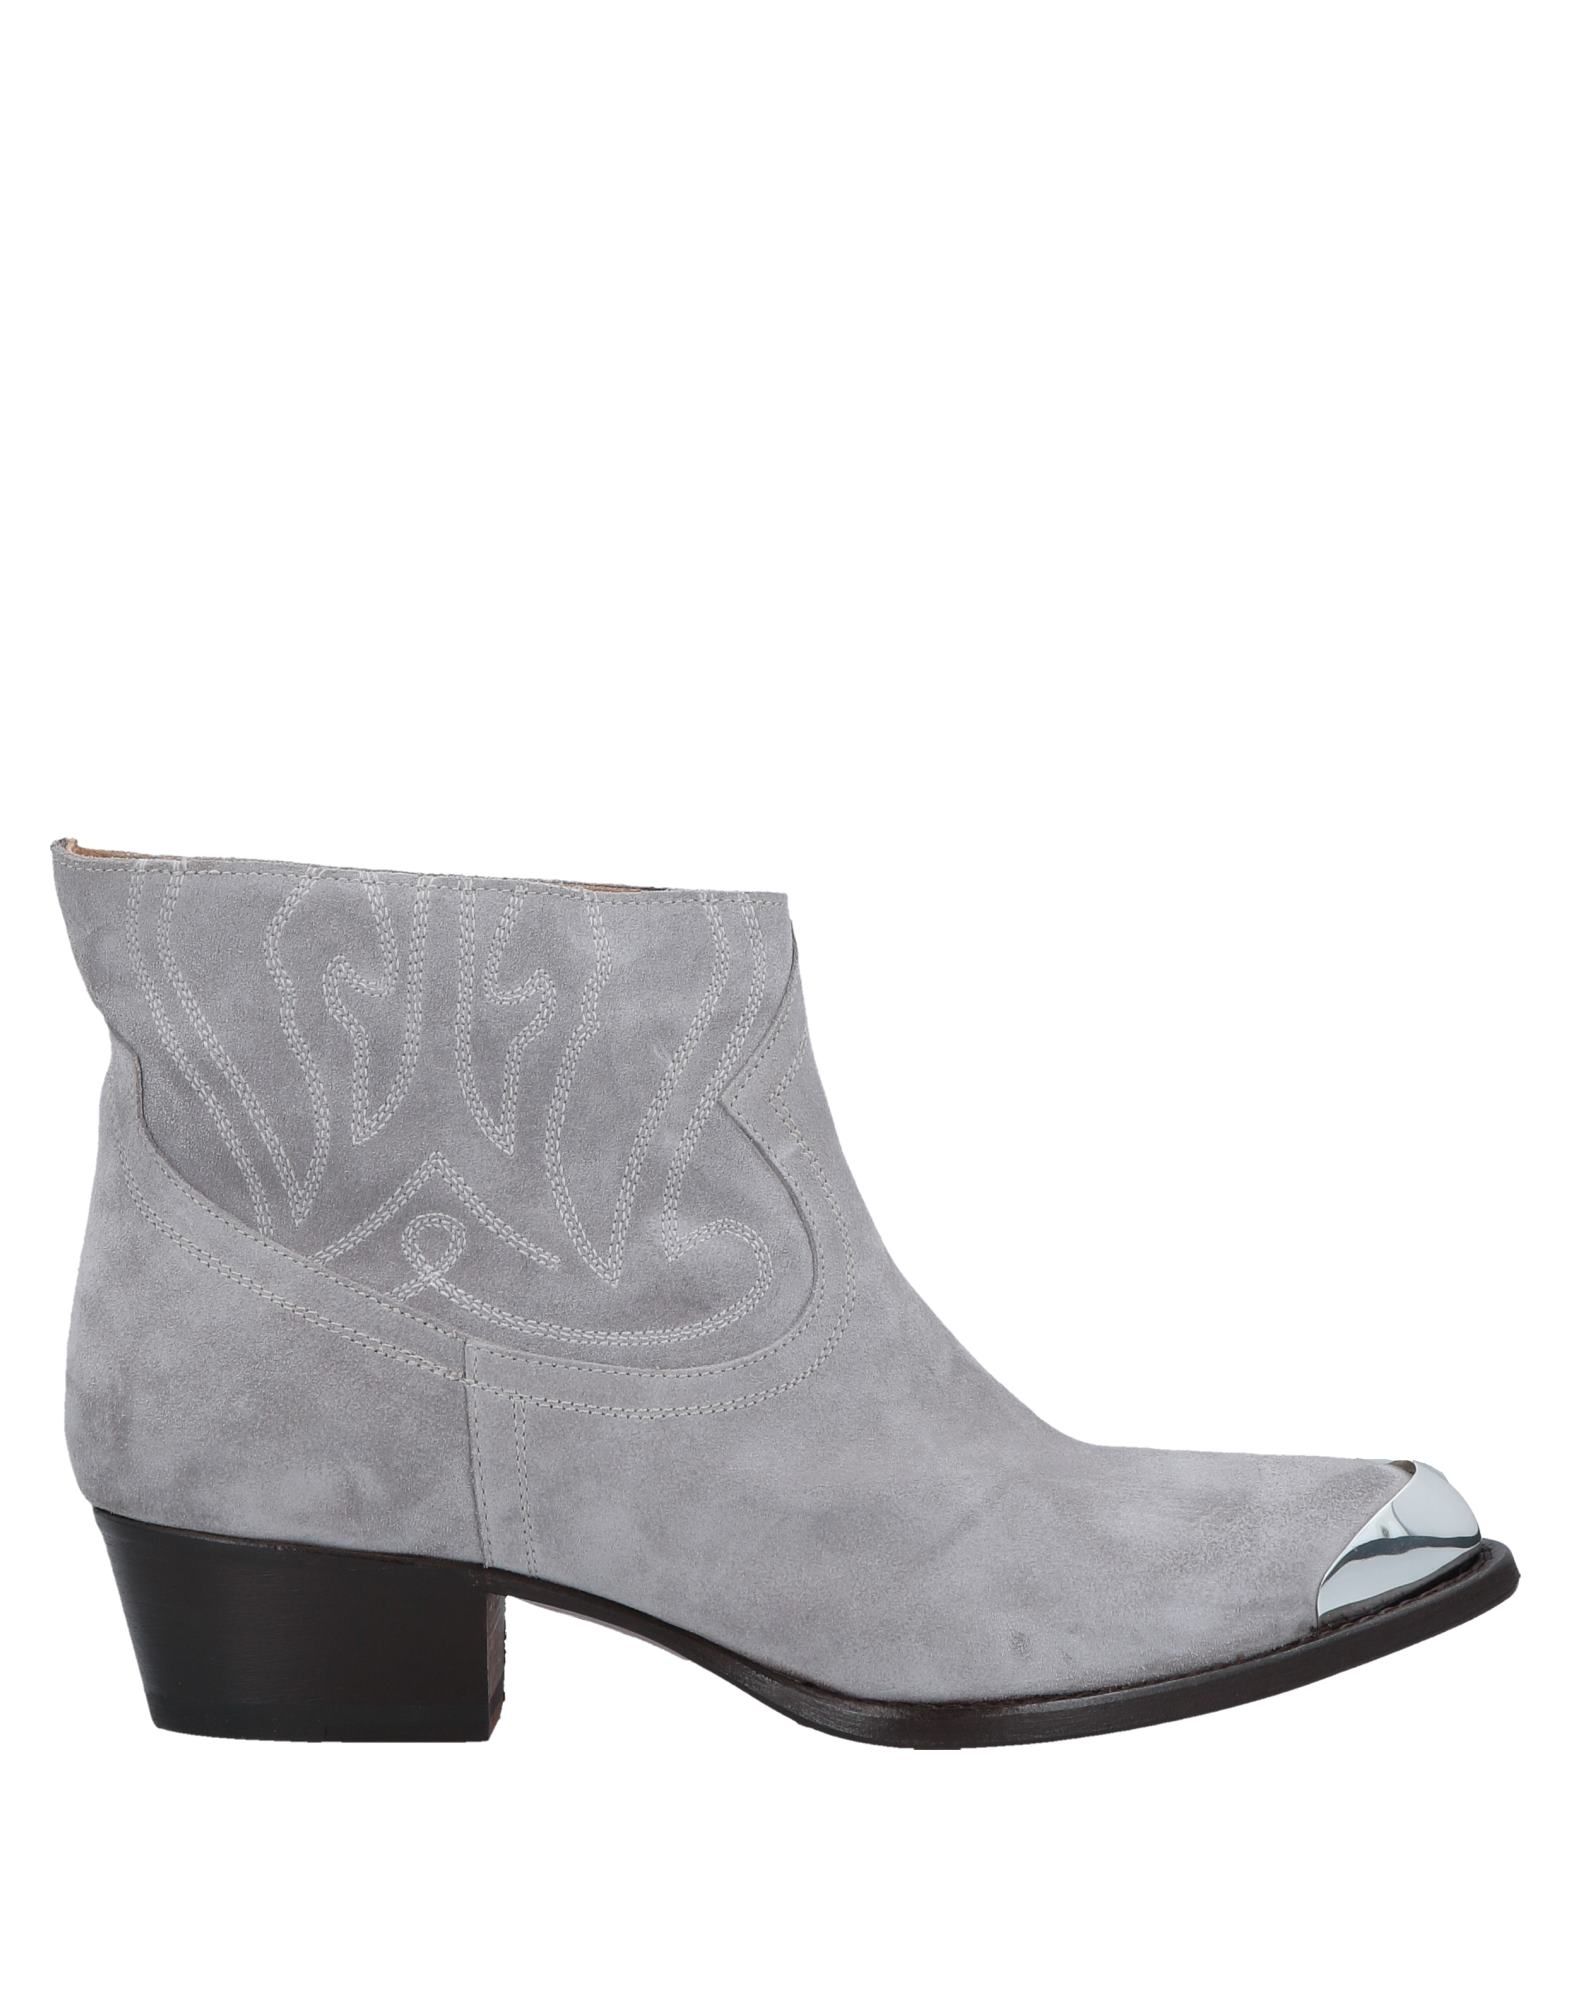 light grey ankle boots